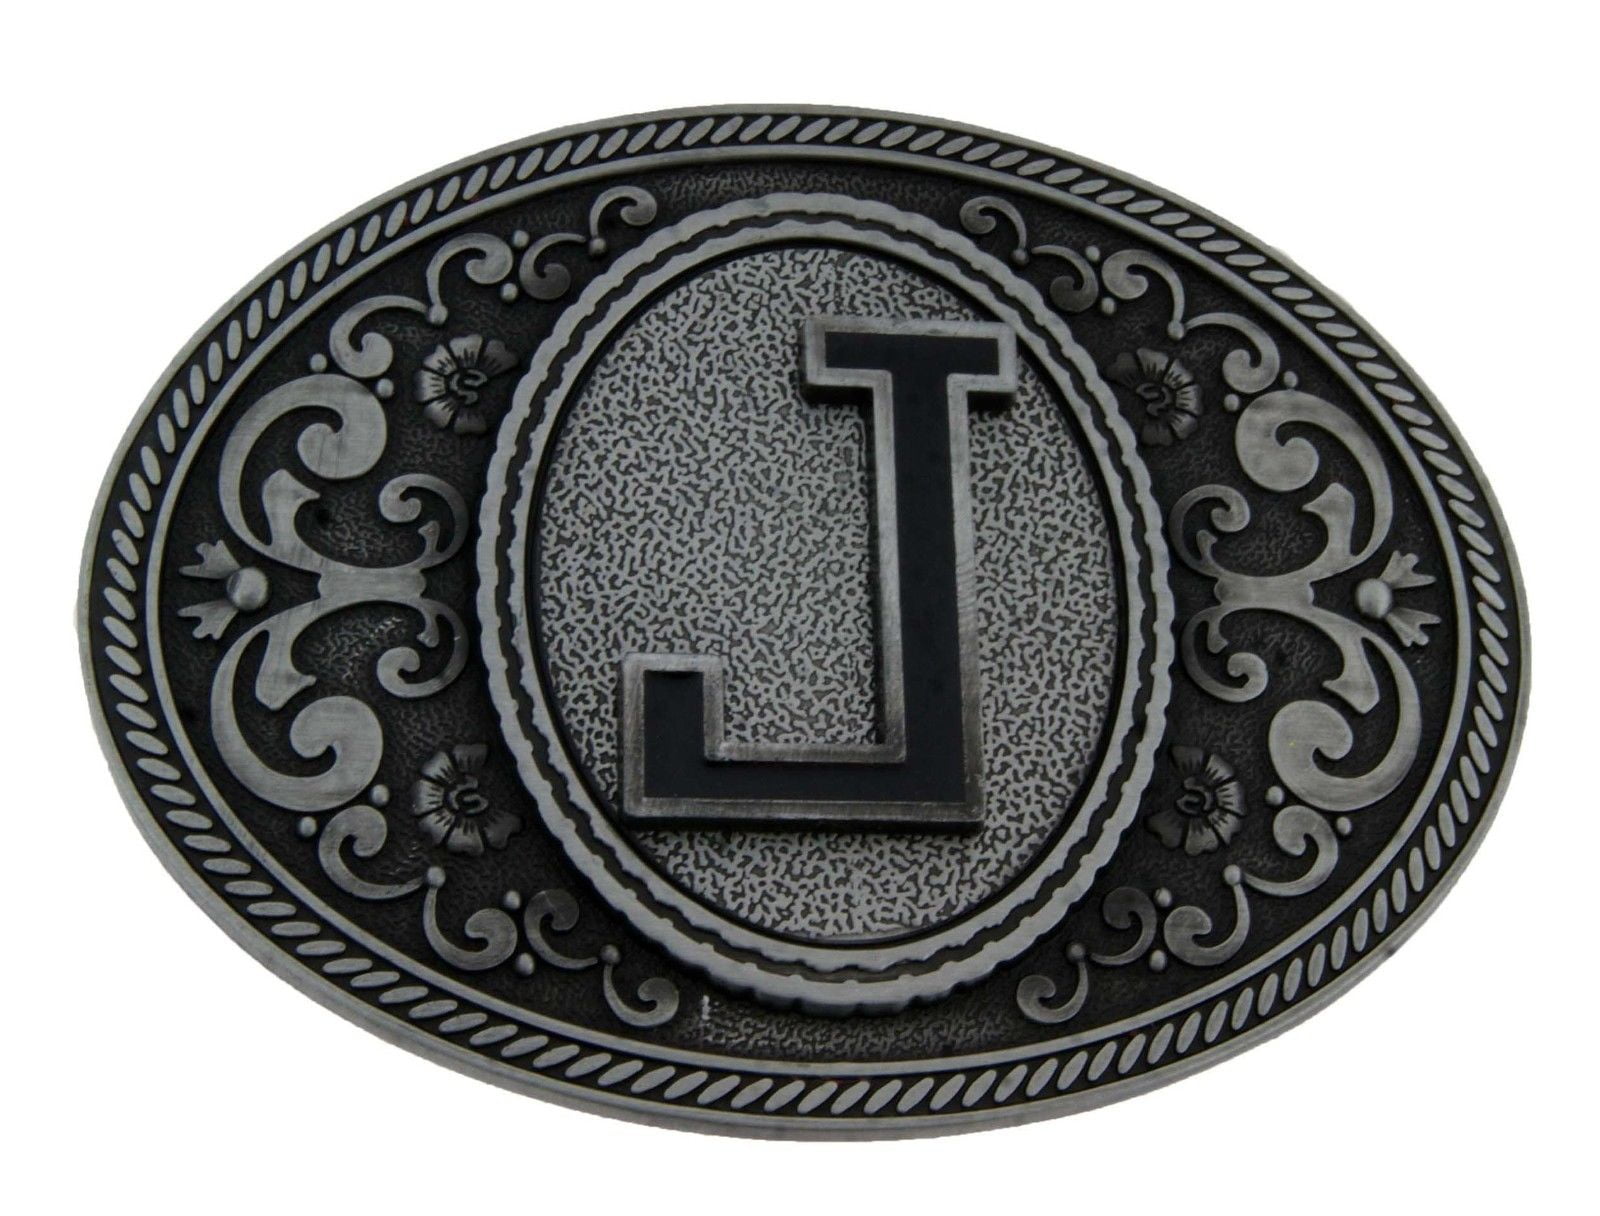 Initial Letter "A" Cowboy Rodeo Western Metal Belt Buckle 